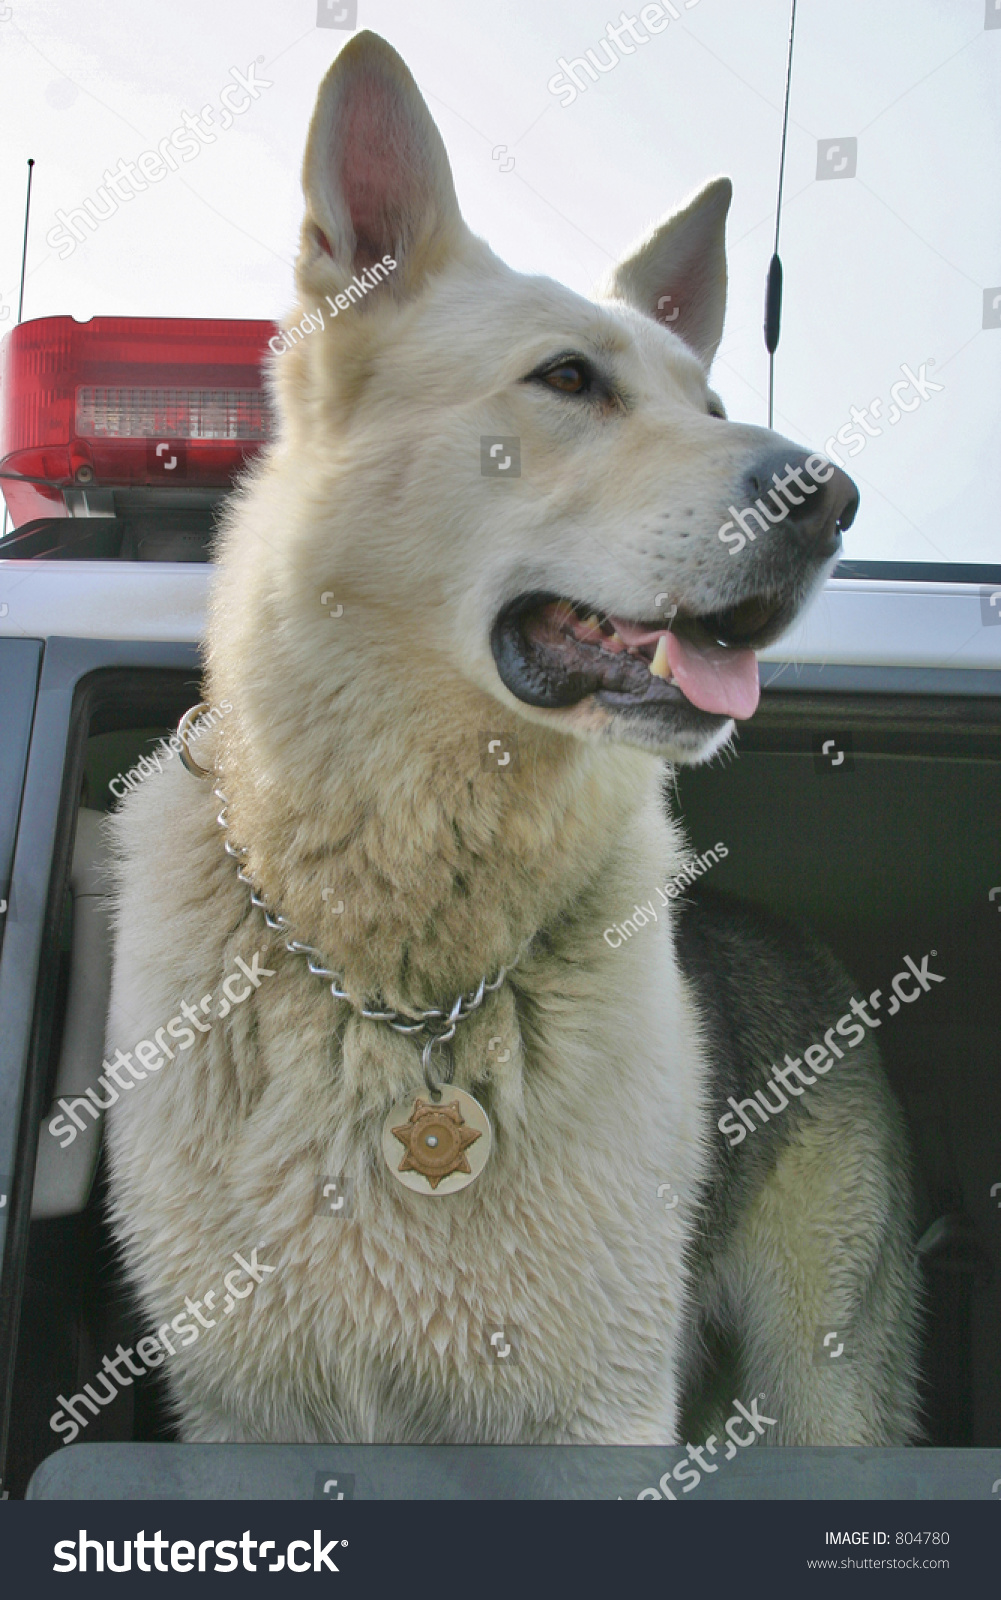 Police Dog Wearing A Badge In Sheriff'S Vehicle. Stock Photo 804780 ...